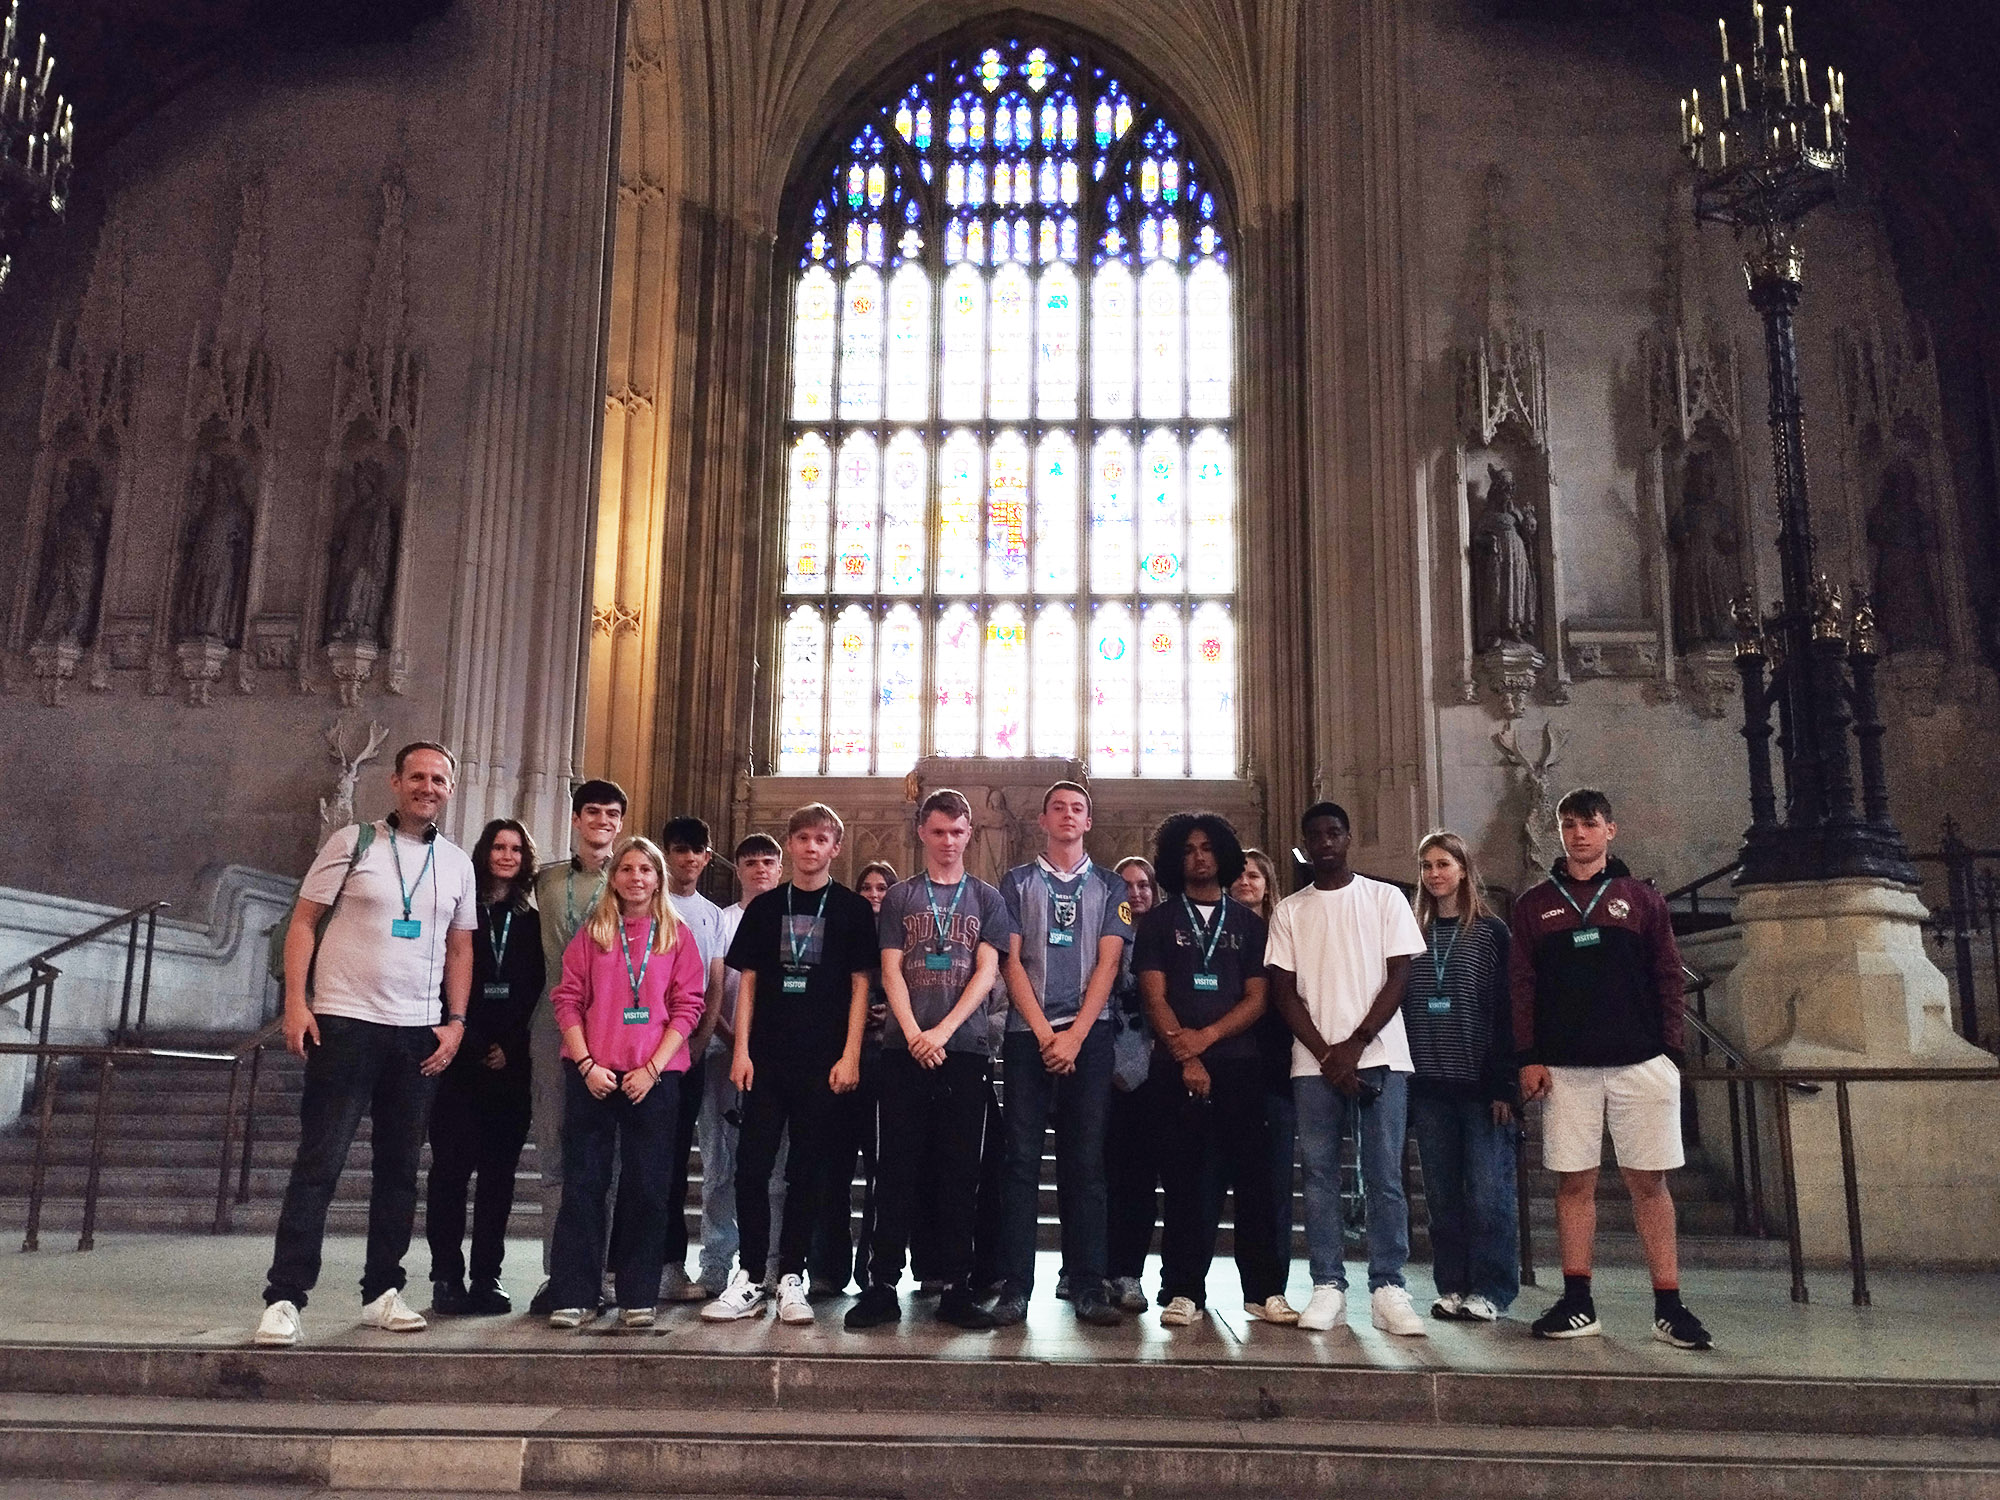 Students pose for a photo in the House of Parliament during a trip to London